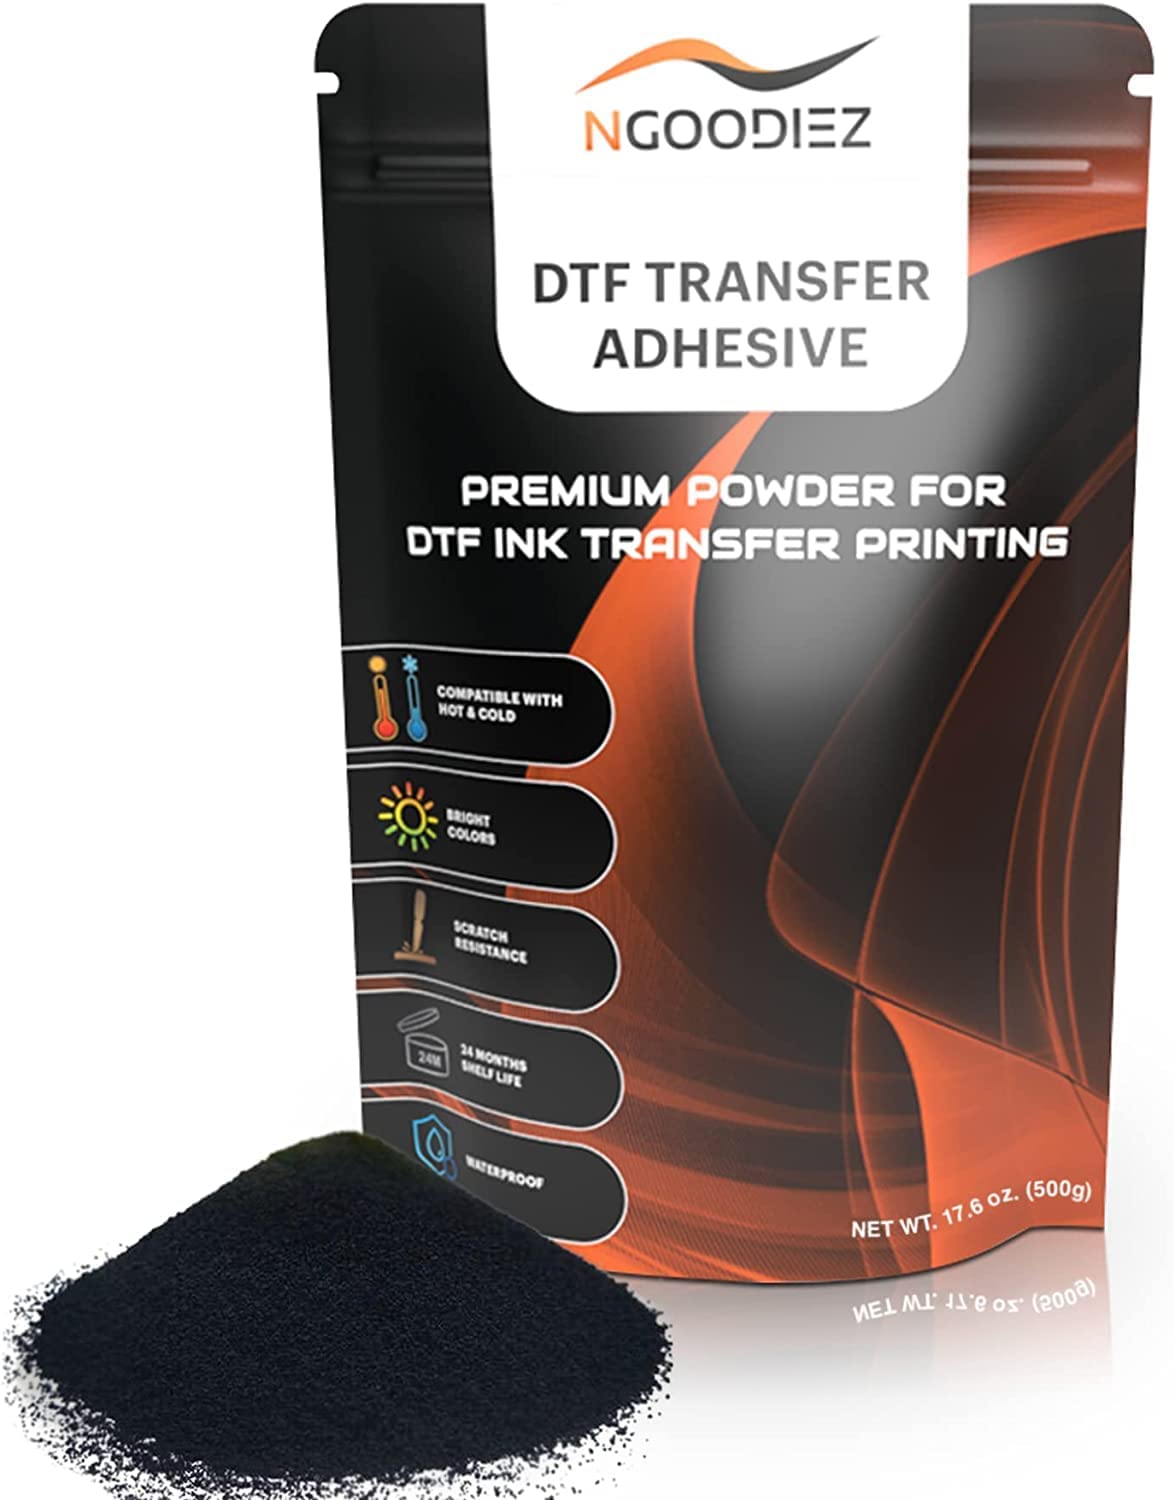  DTF Powder For All Sublimation DTF Printer, 500g / 17.6oz  DTF PreTreat Transfer Powder For Black Or Dark Colored Garments, DTF Hot  Melt Adhesive Powder For All Fabric Jeans Cotton